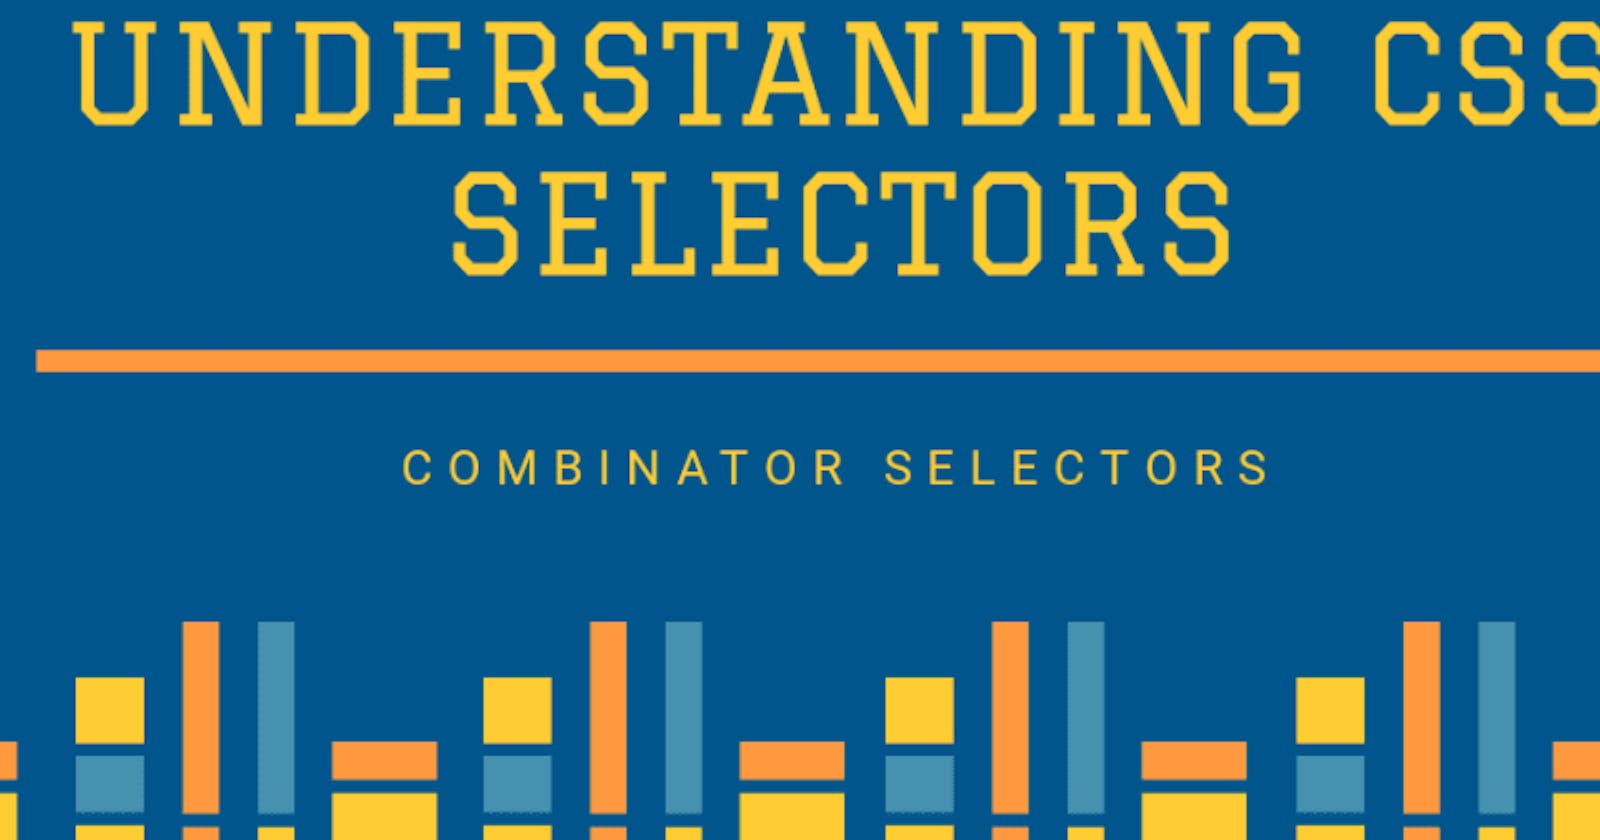 How to choose a perfect selector in CSS